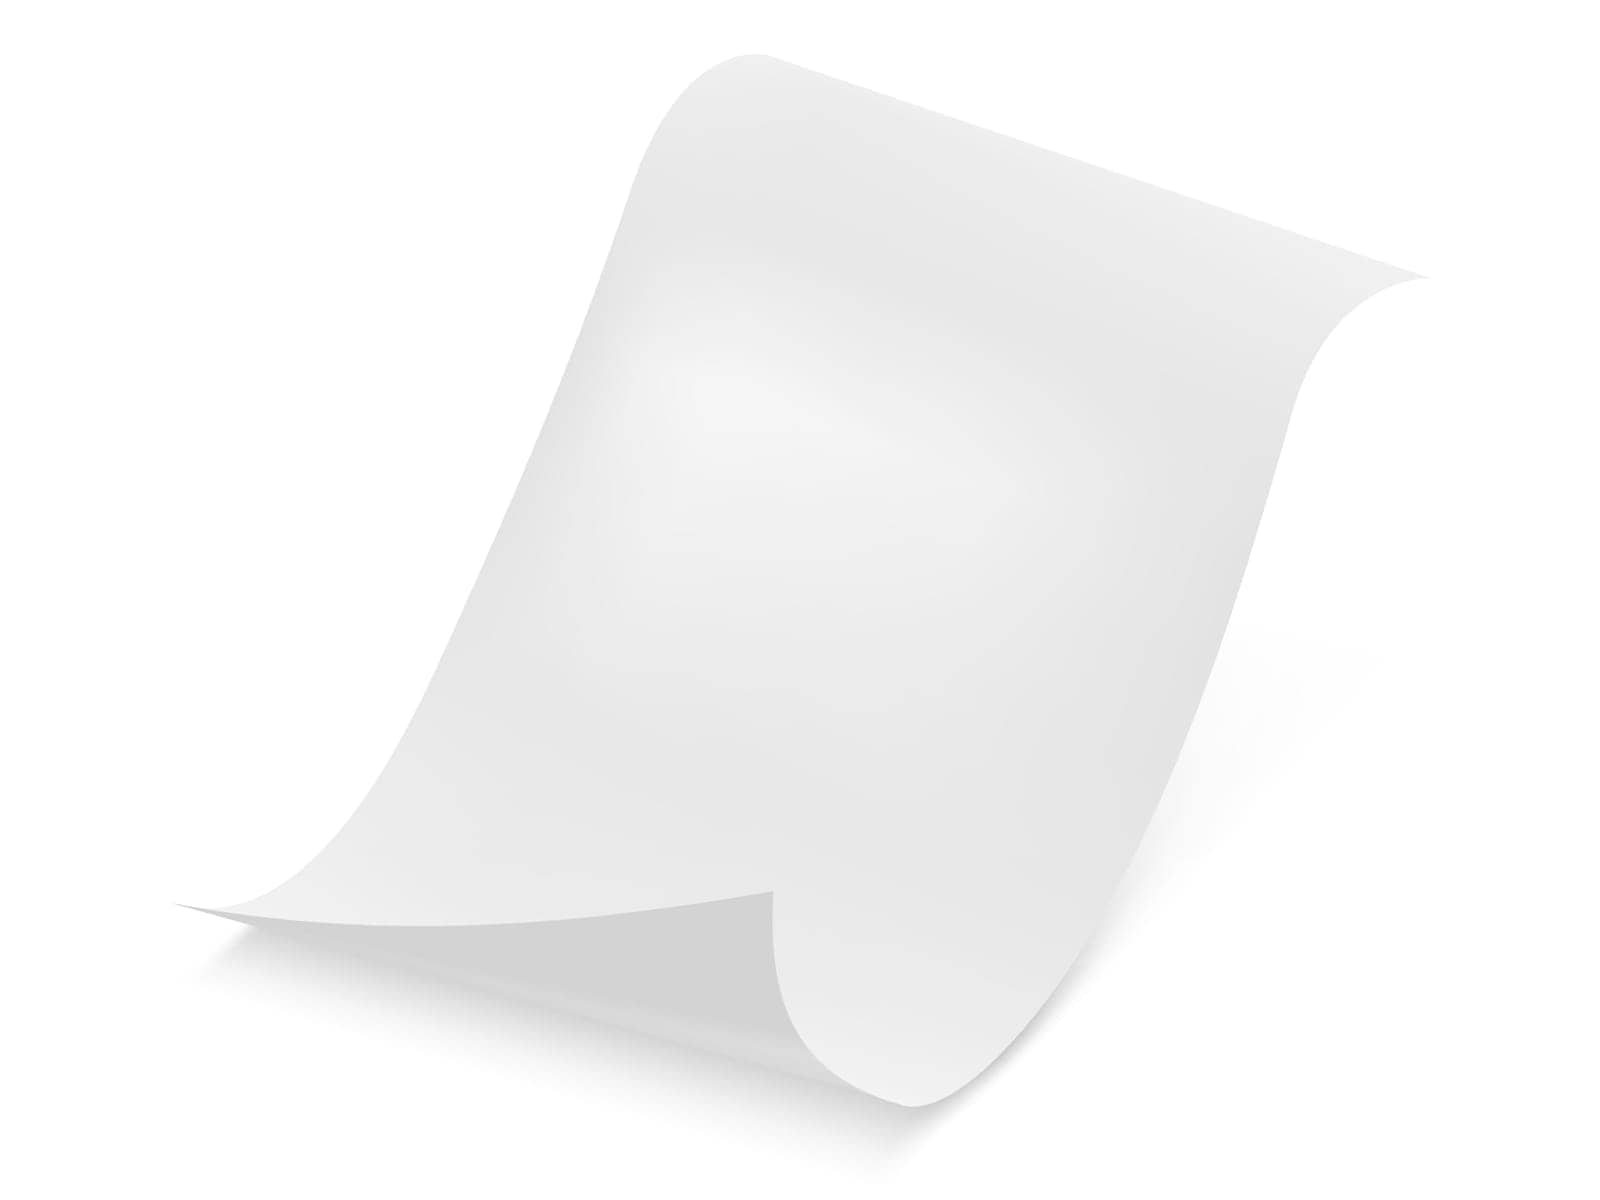 3D Blank Fly Paper Sheet With Curled Corner by VectorThings